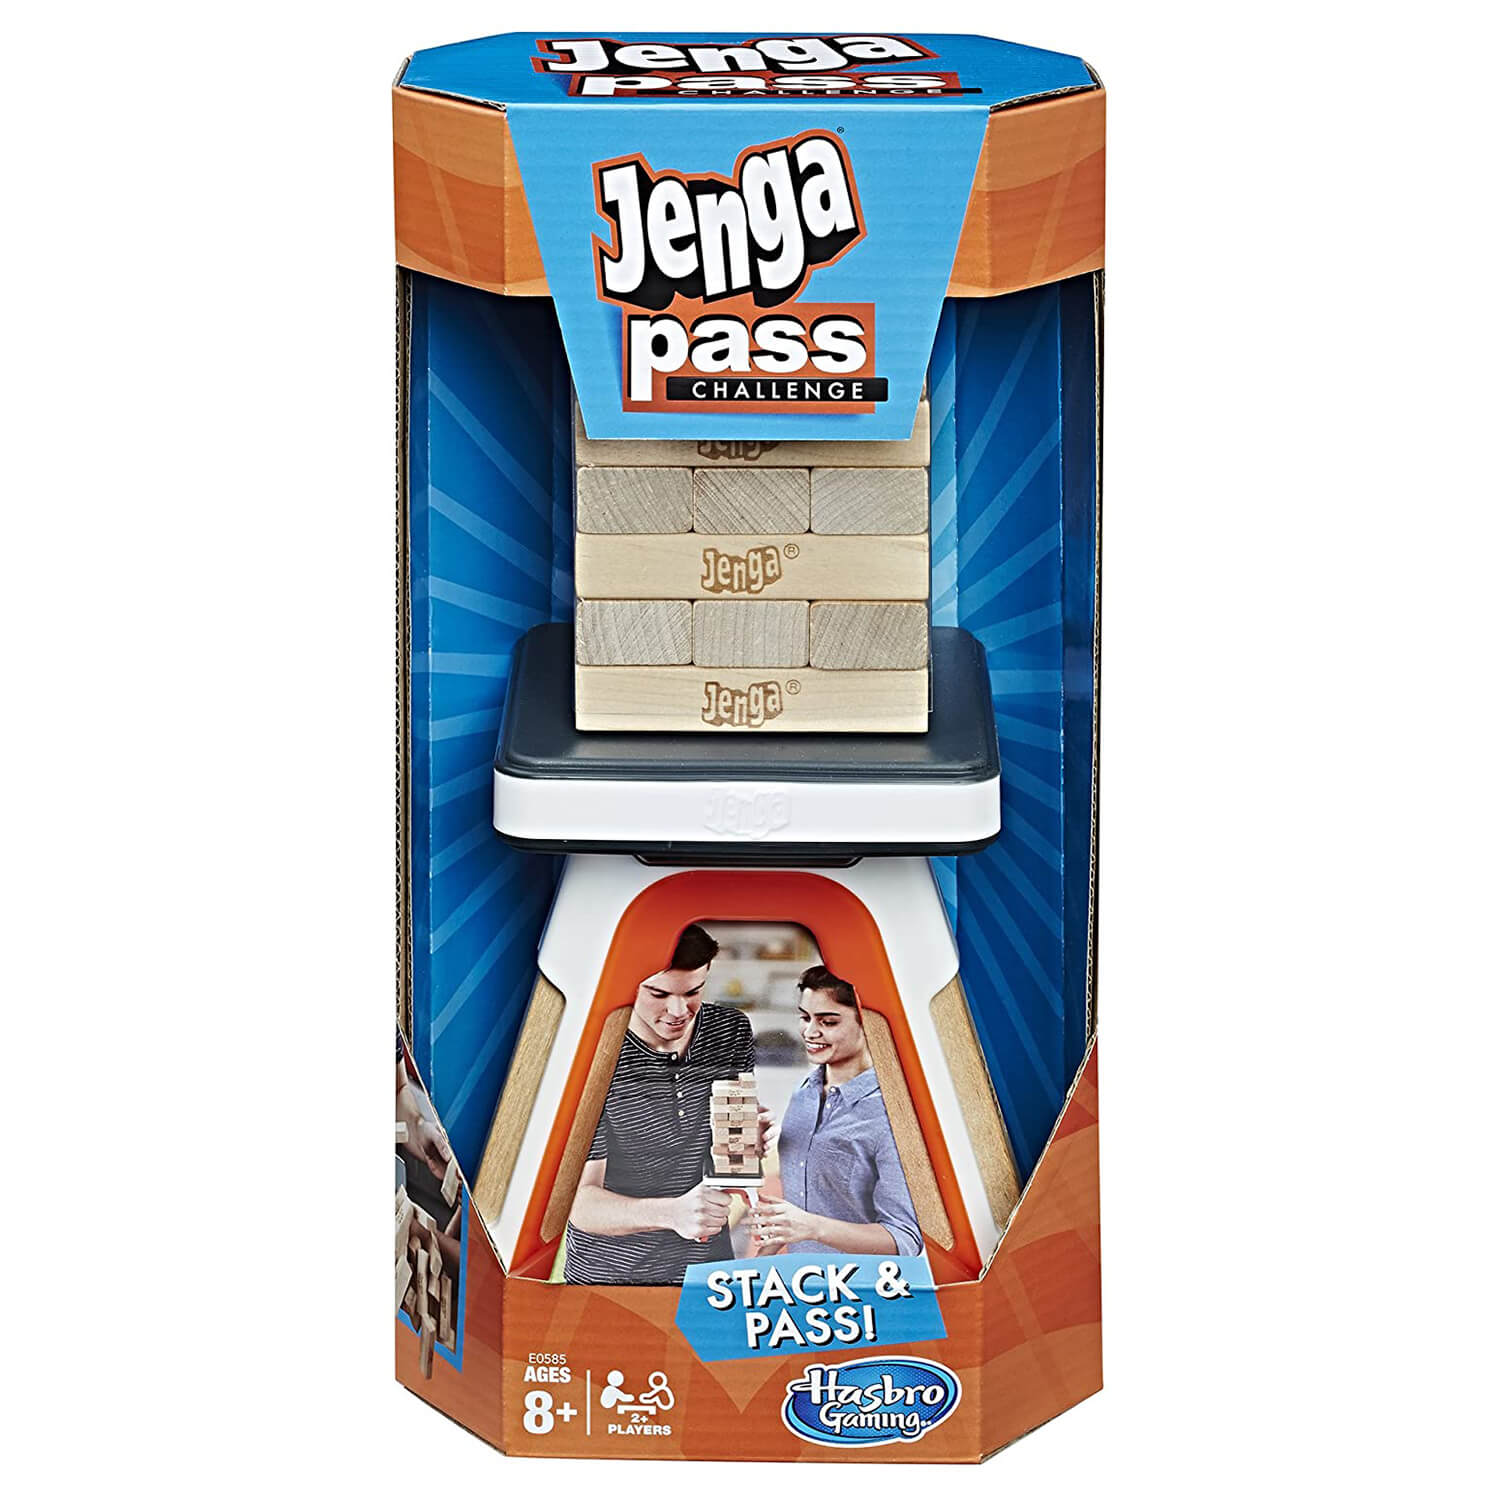 Front view of the Jenga Pass Challenge Game package.